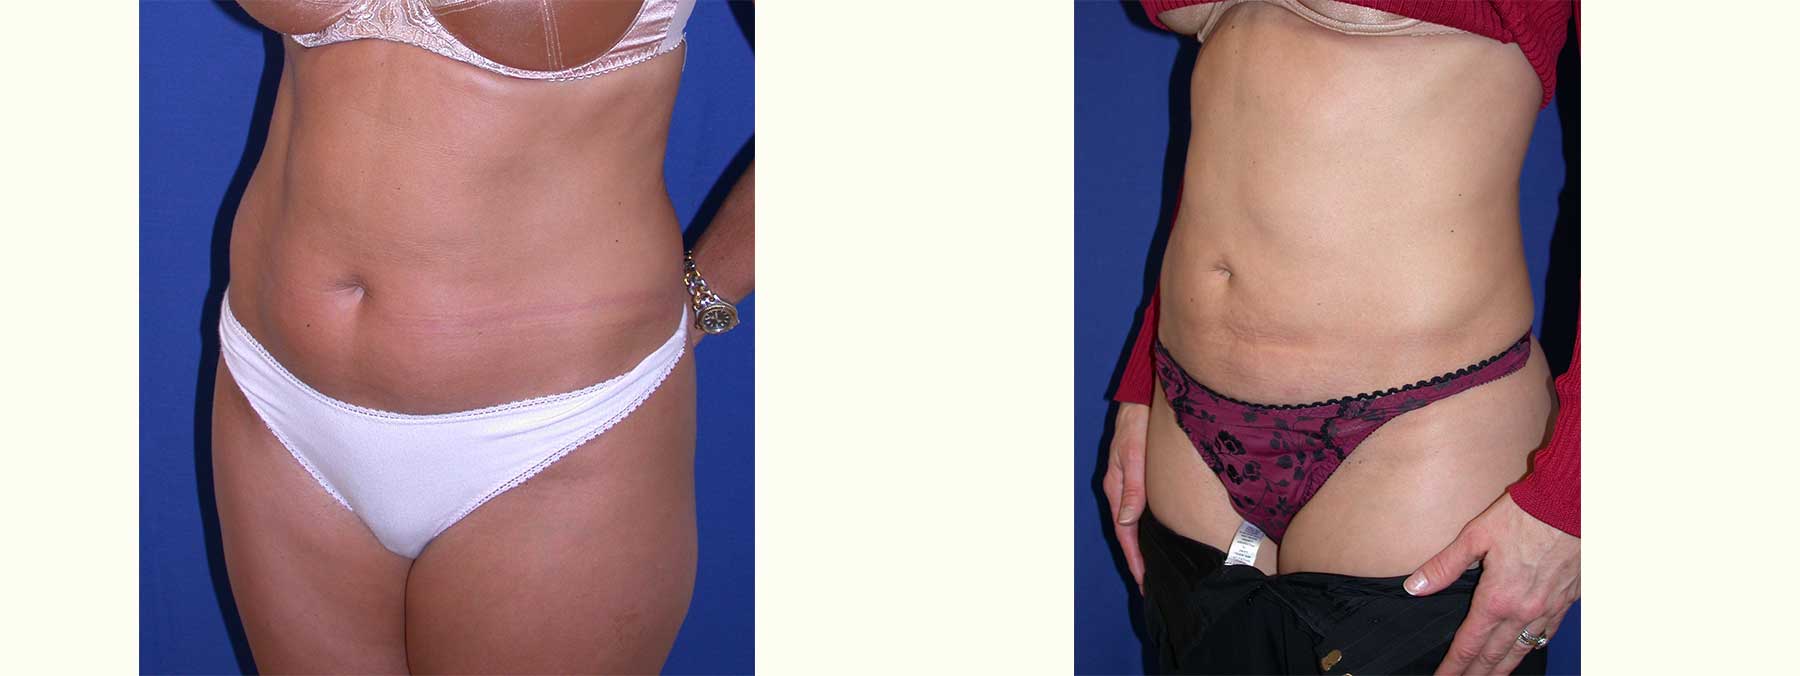 Before and After Image of Liposuction